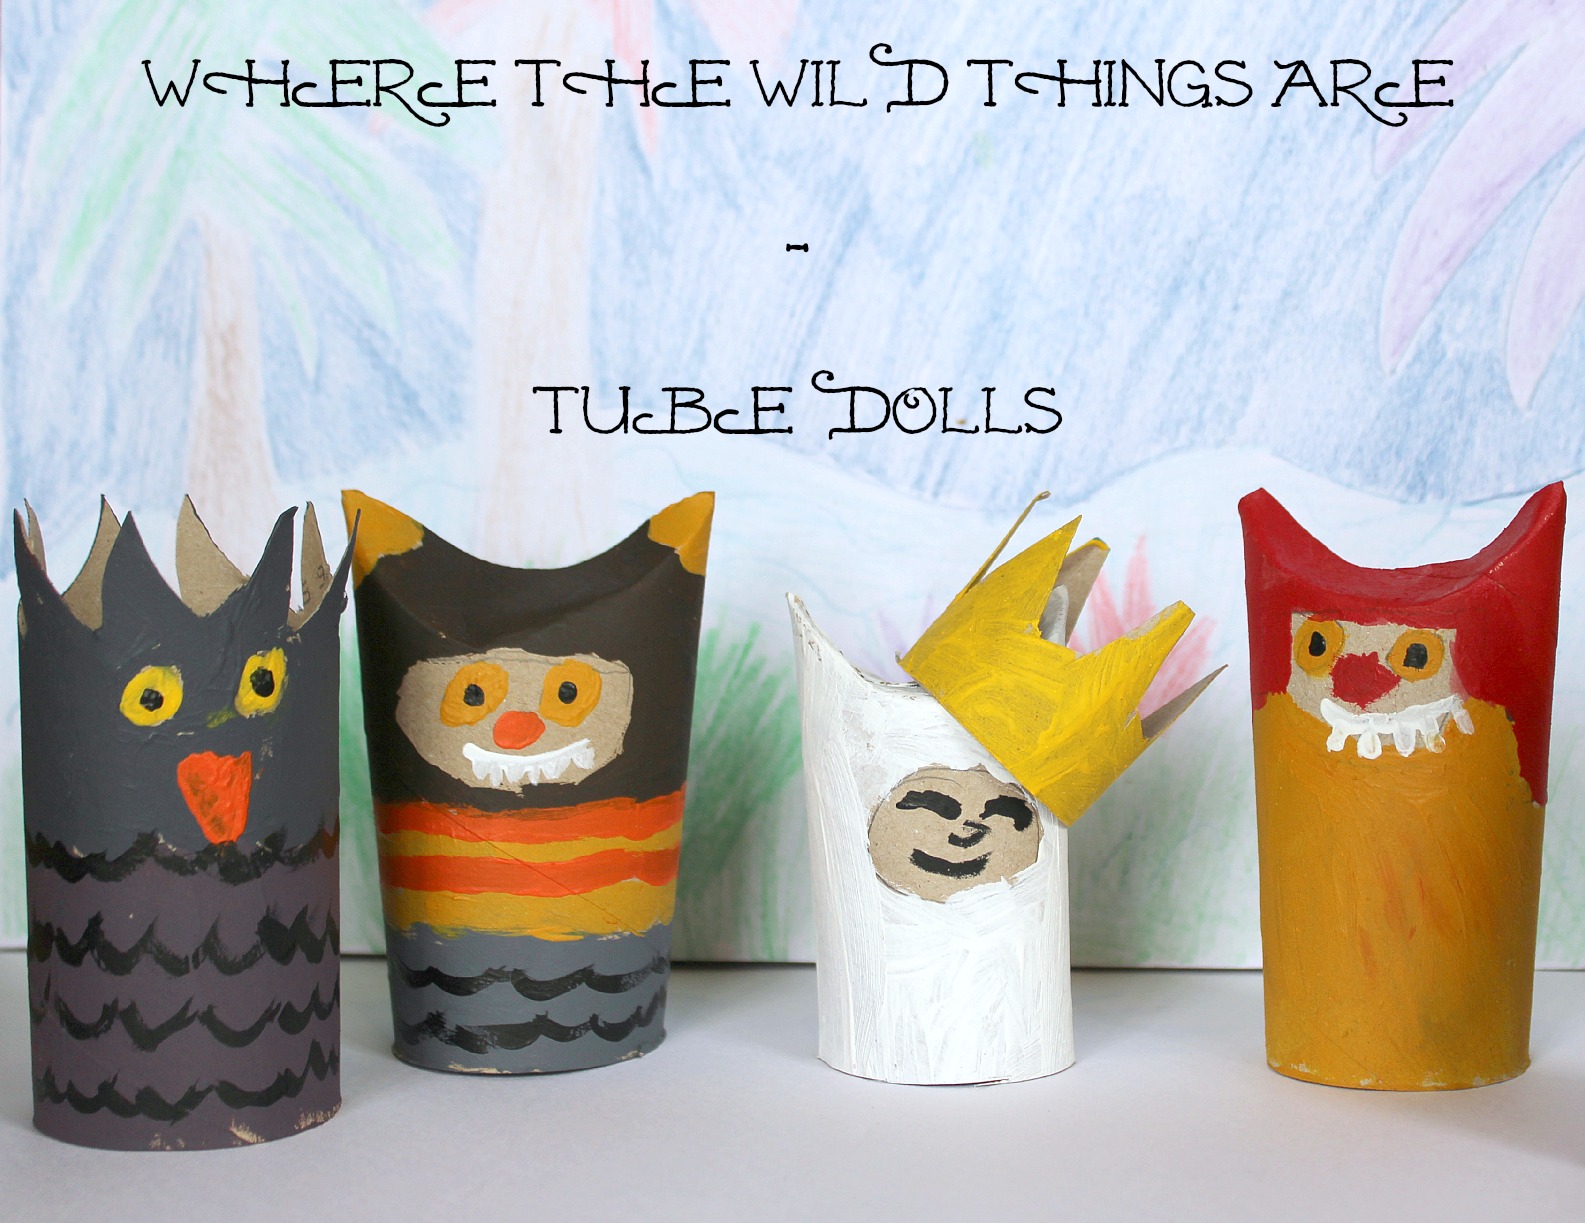 WHERE THE WILD THINGS ARE TITLE